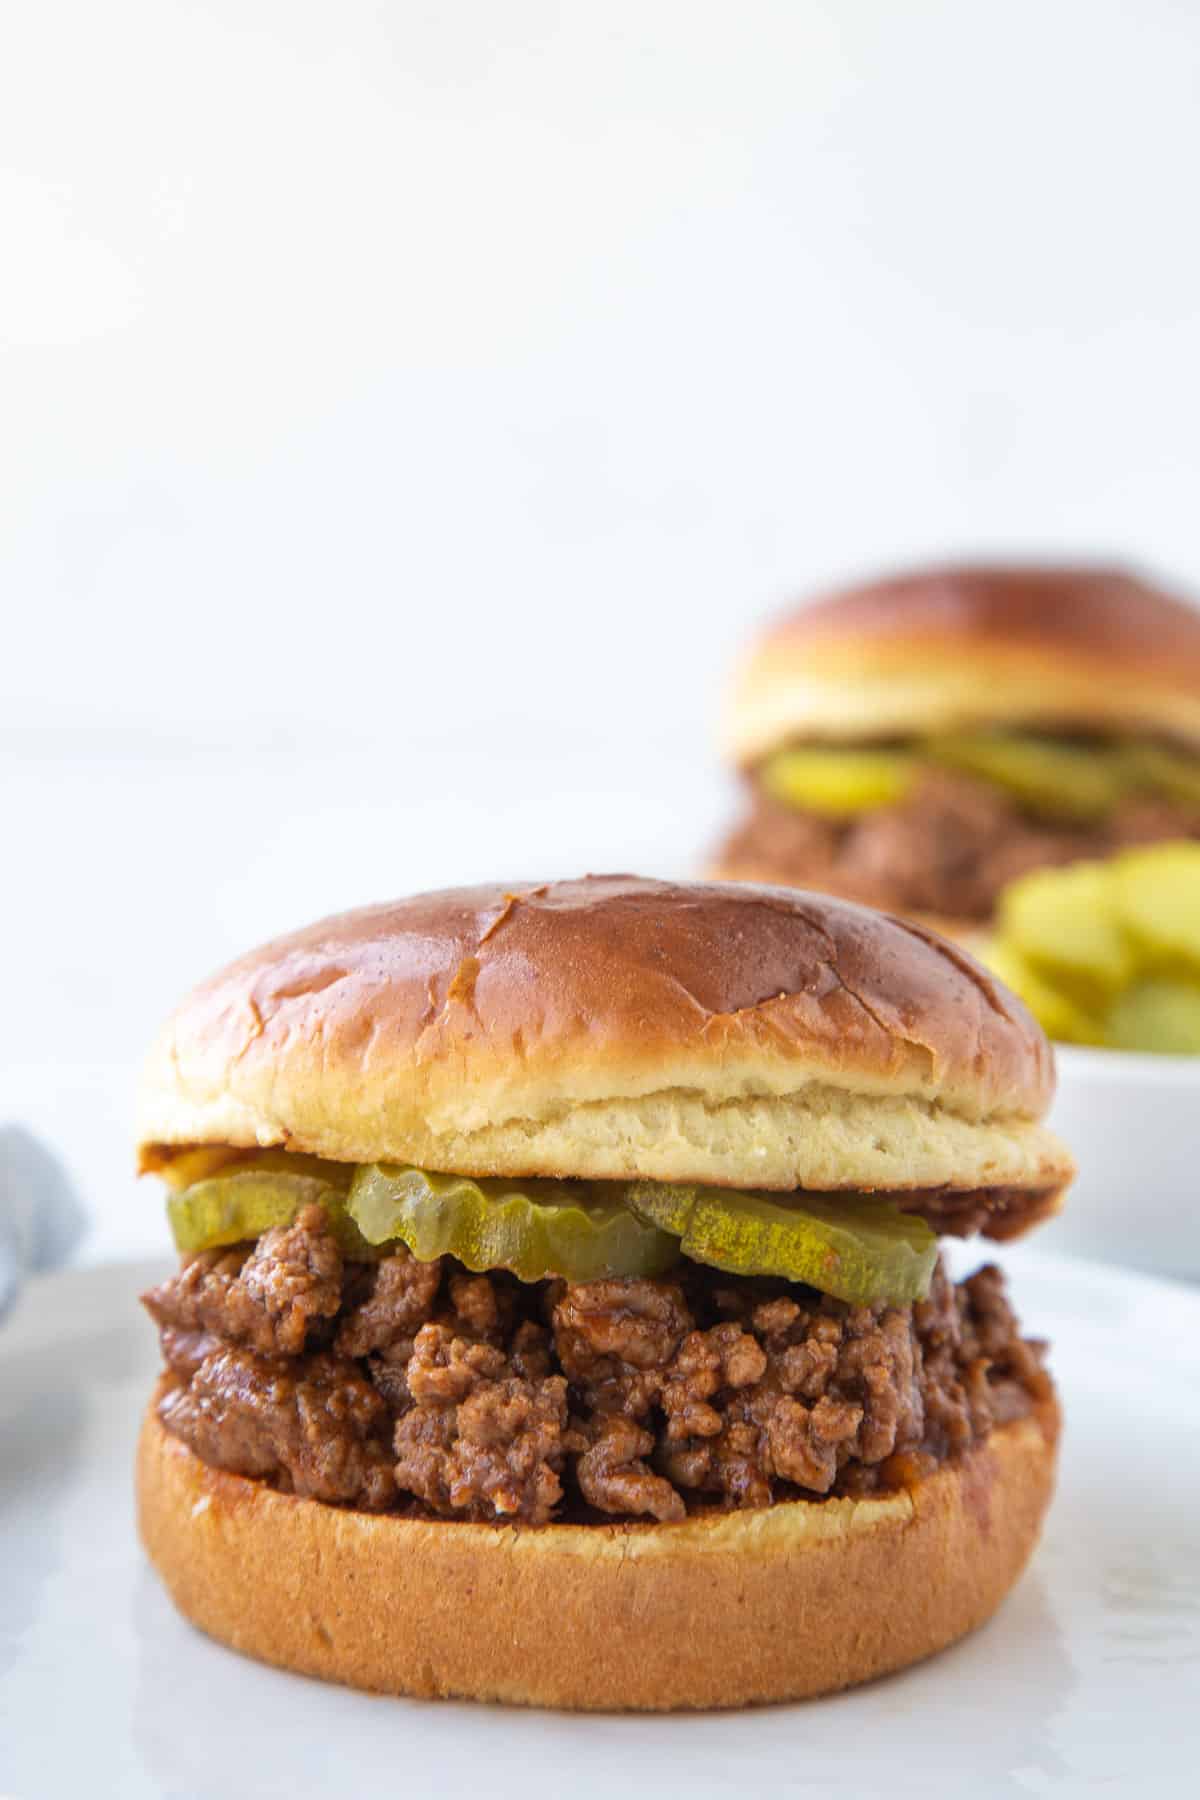 old fashioned sloppy joe sandwich on brioche with pickle chips, sitting on a white plate.